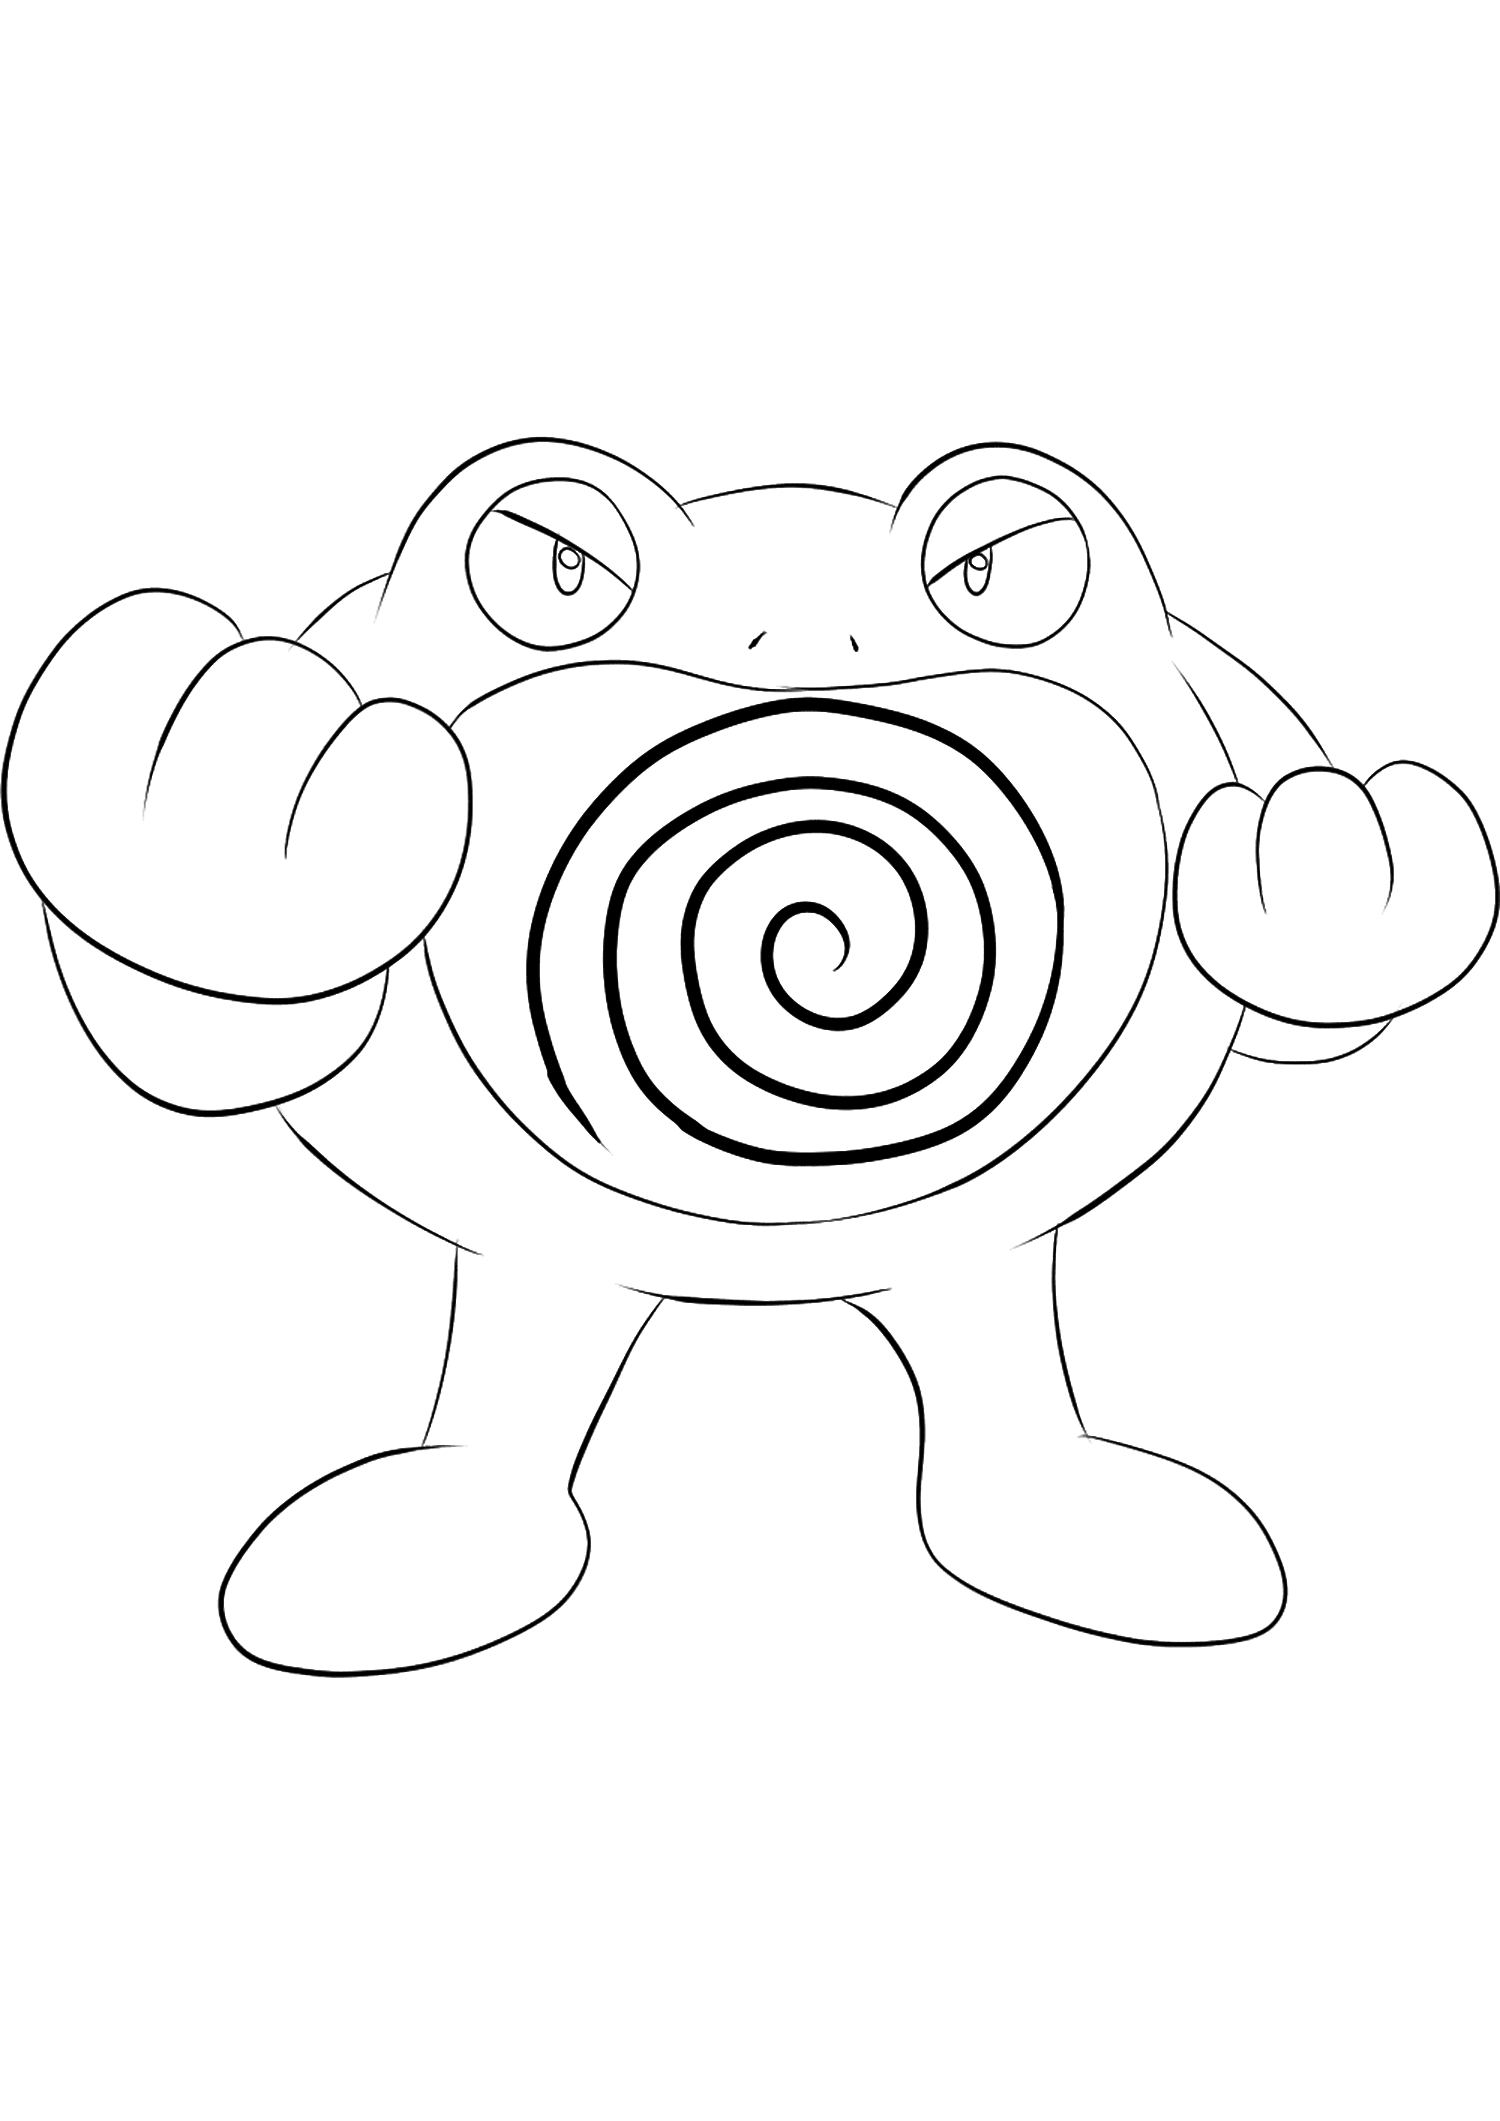 Poliwrath (No.62). Poliwrath Coloring page, Generation I Pokemon of type Water and FightingOriginal image credit: Pokemon linearts by Lilly Gerbil on Deviantart.Permission:  All rights reserved © Pokemon company and Ken Sugimori.